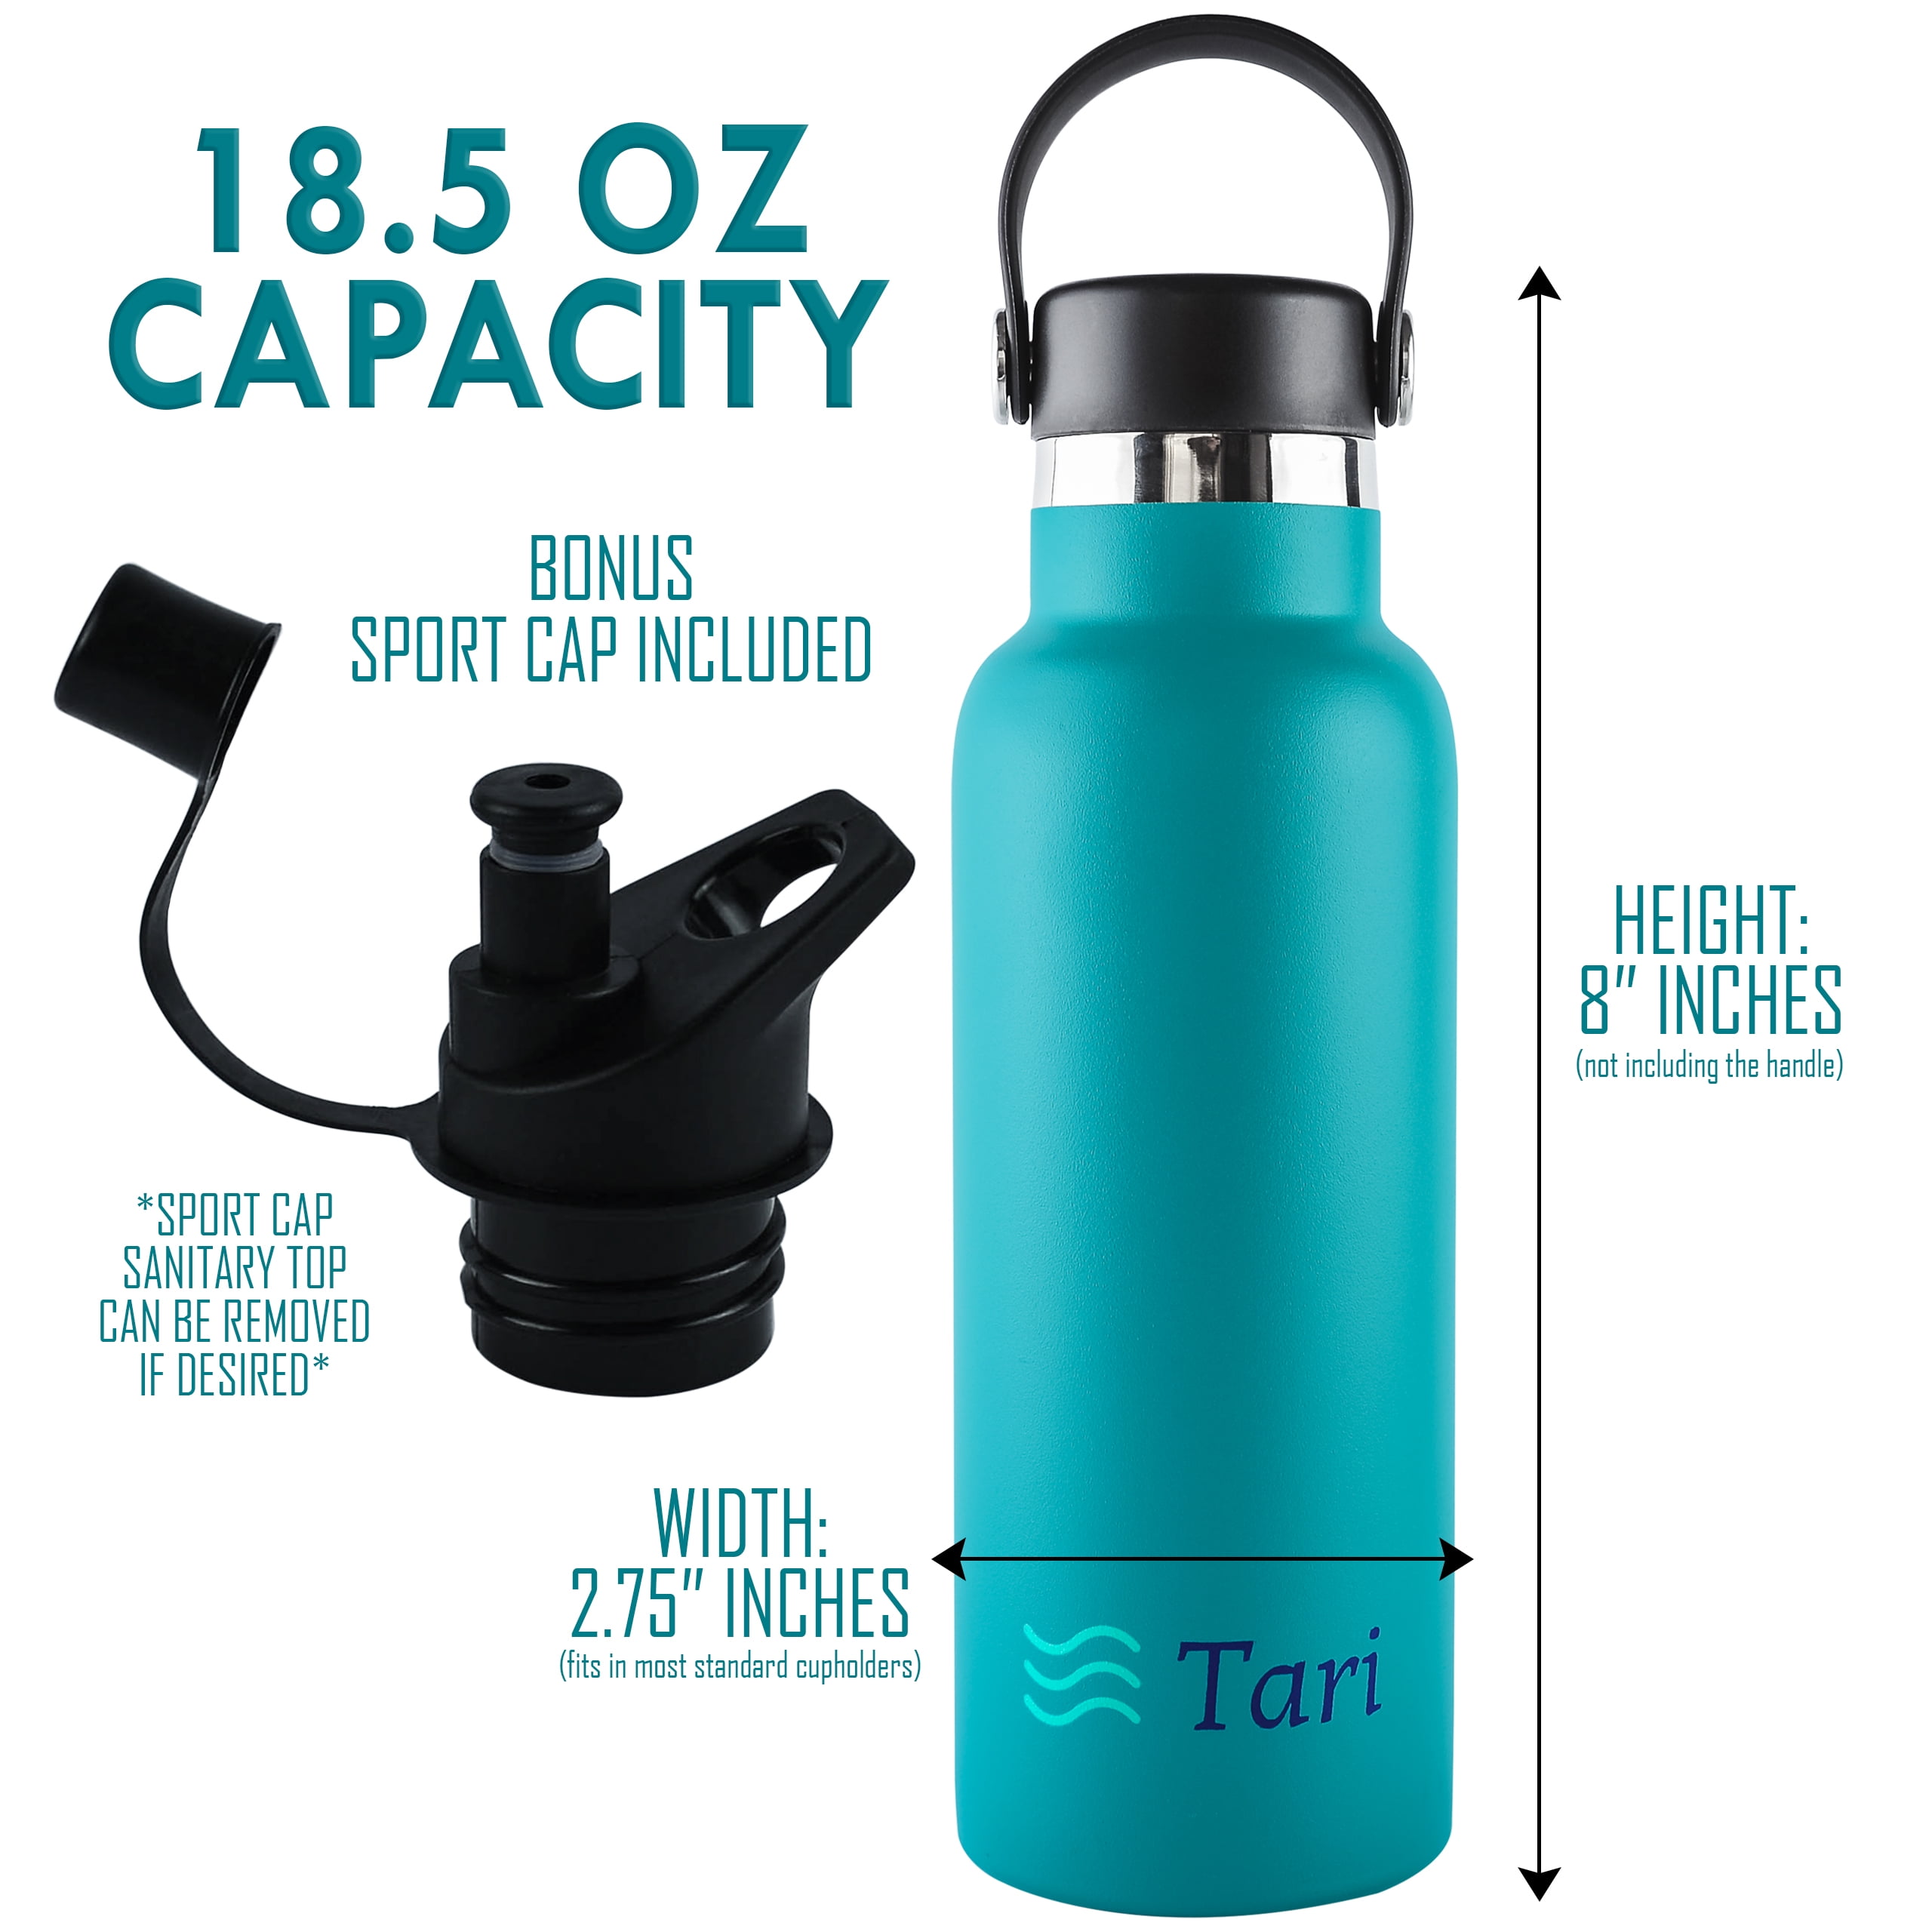 AQwzh 32 oz White Stainless Steel Water Bottle with Wide mouth, Straw, and  Lid 